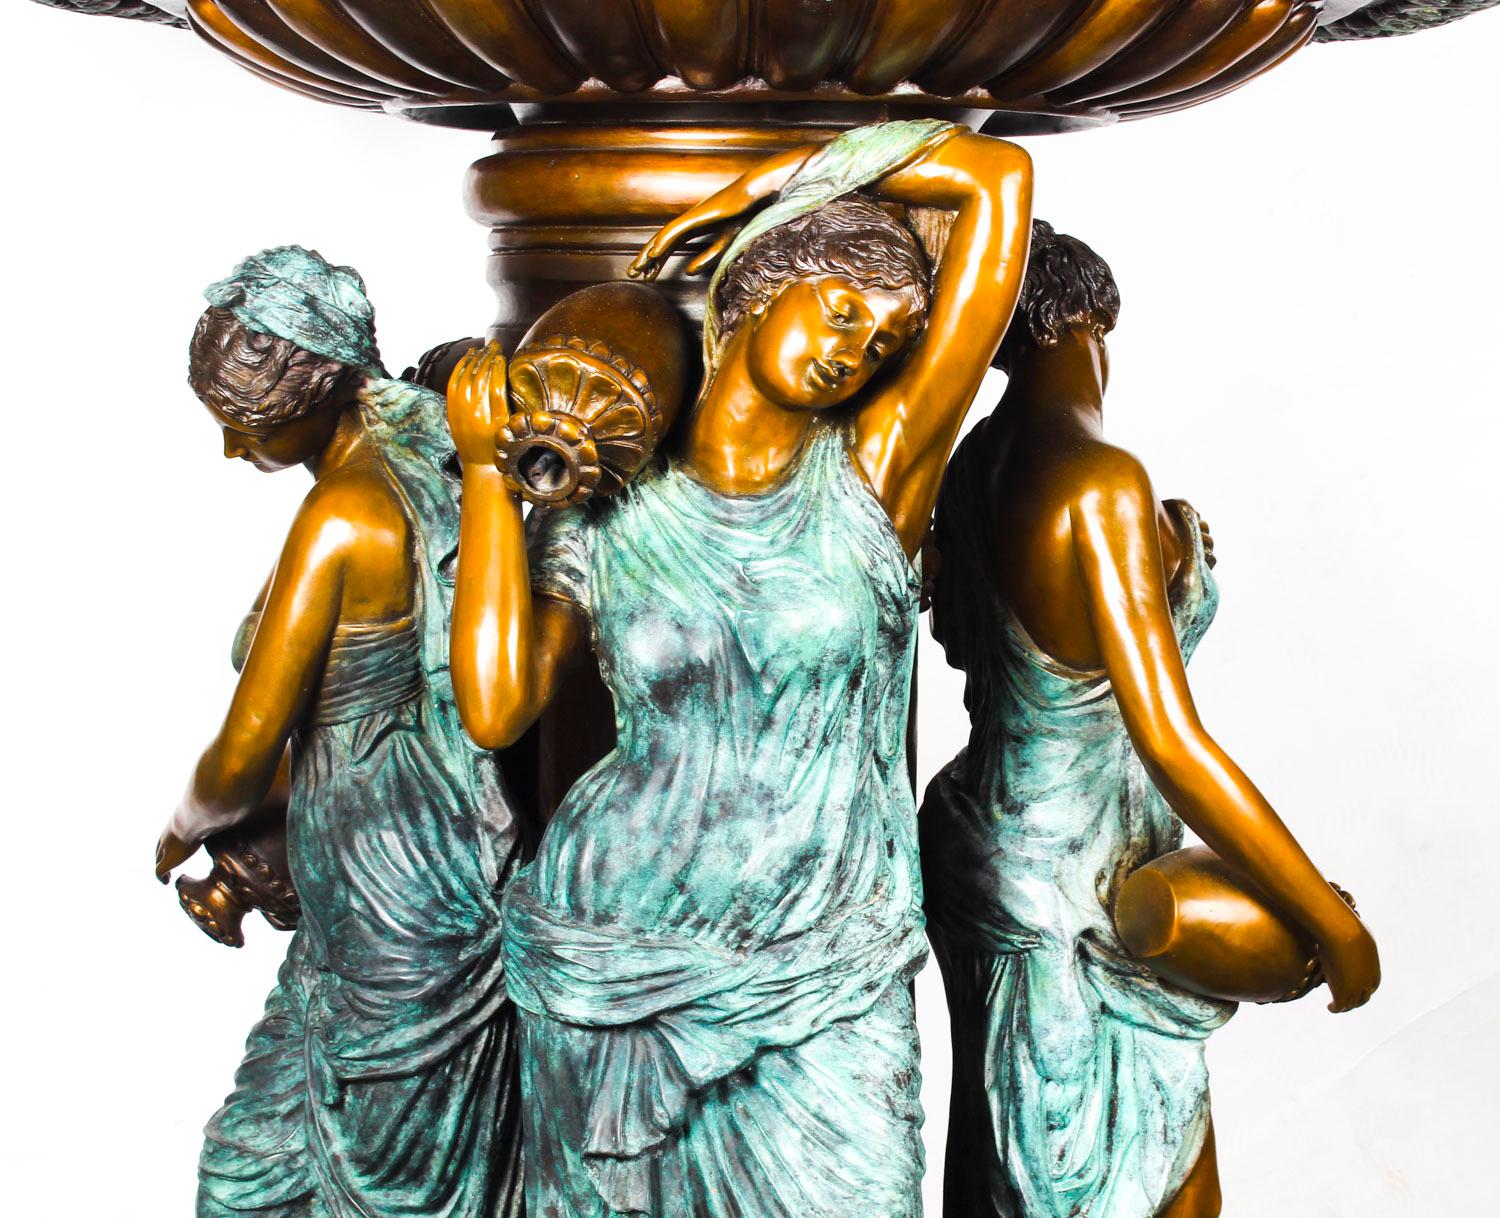 Italian Vintage Monumental Neo-Classical Revival Bronze Sculptural Pond Fountain 20th C For Sale